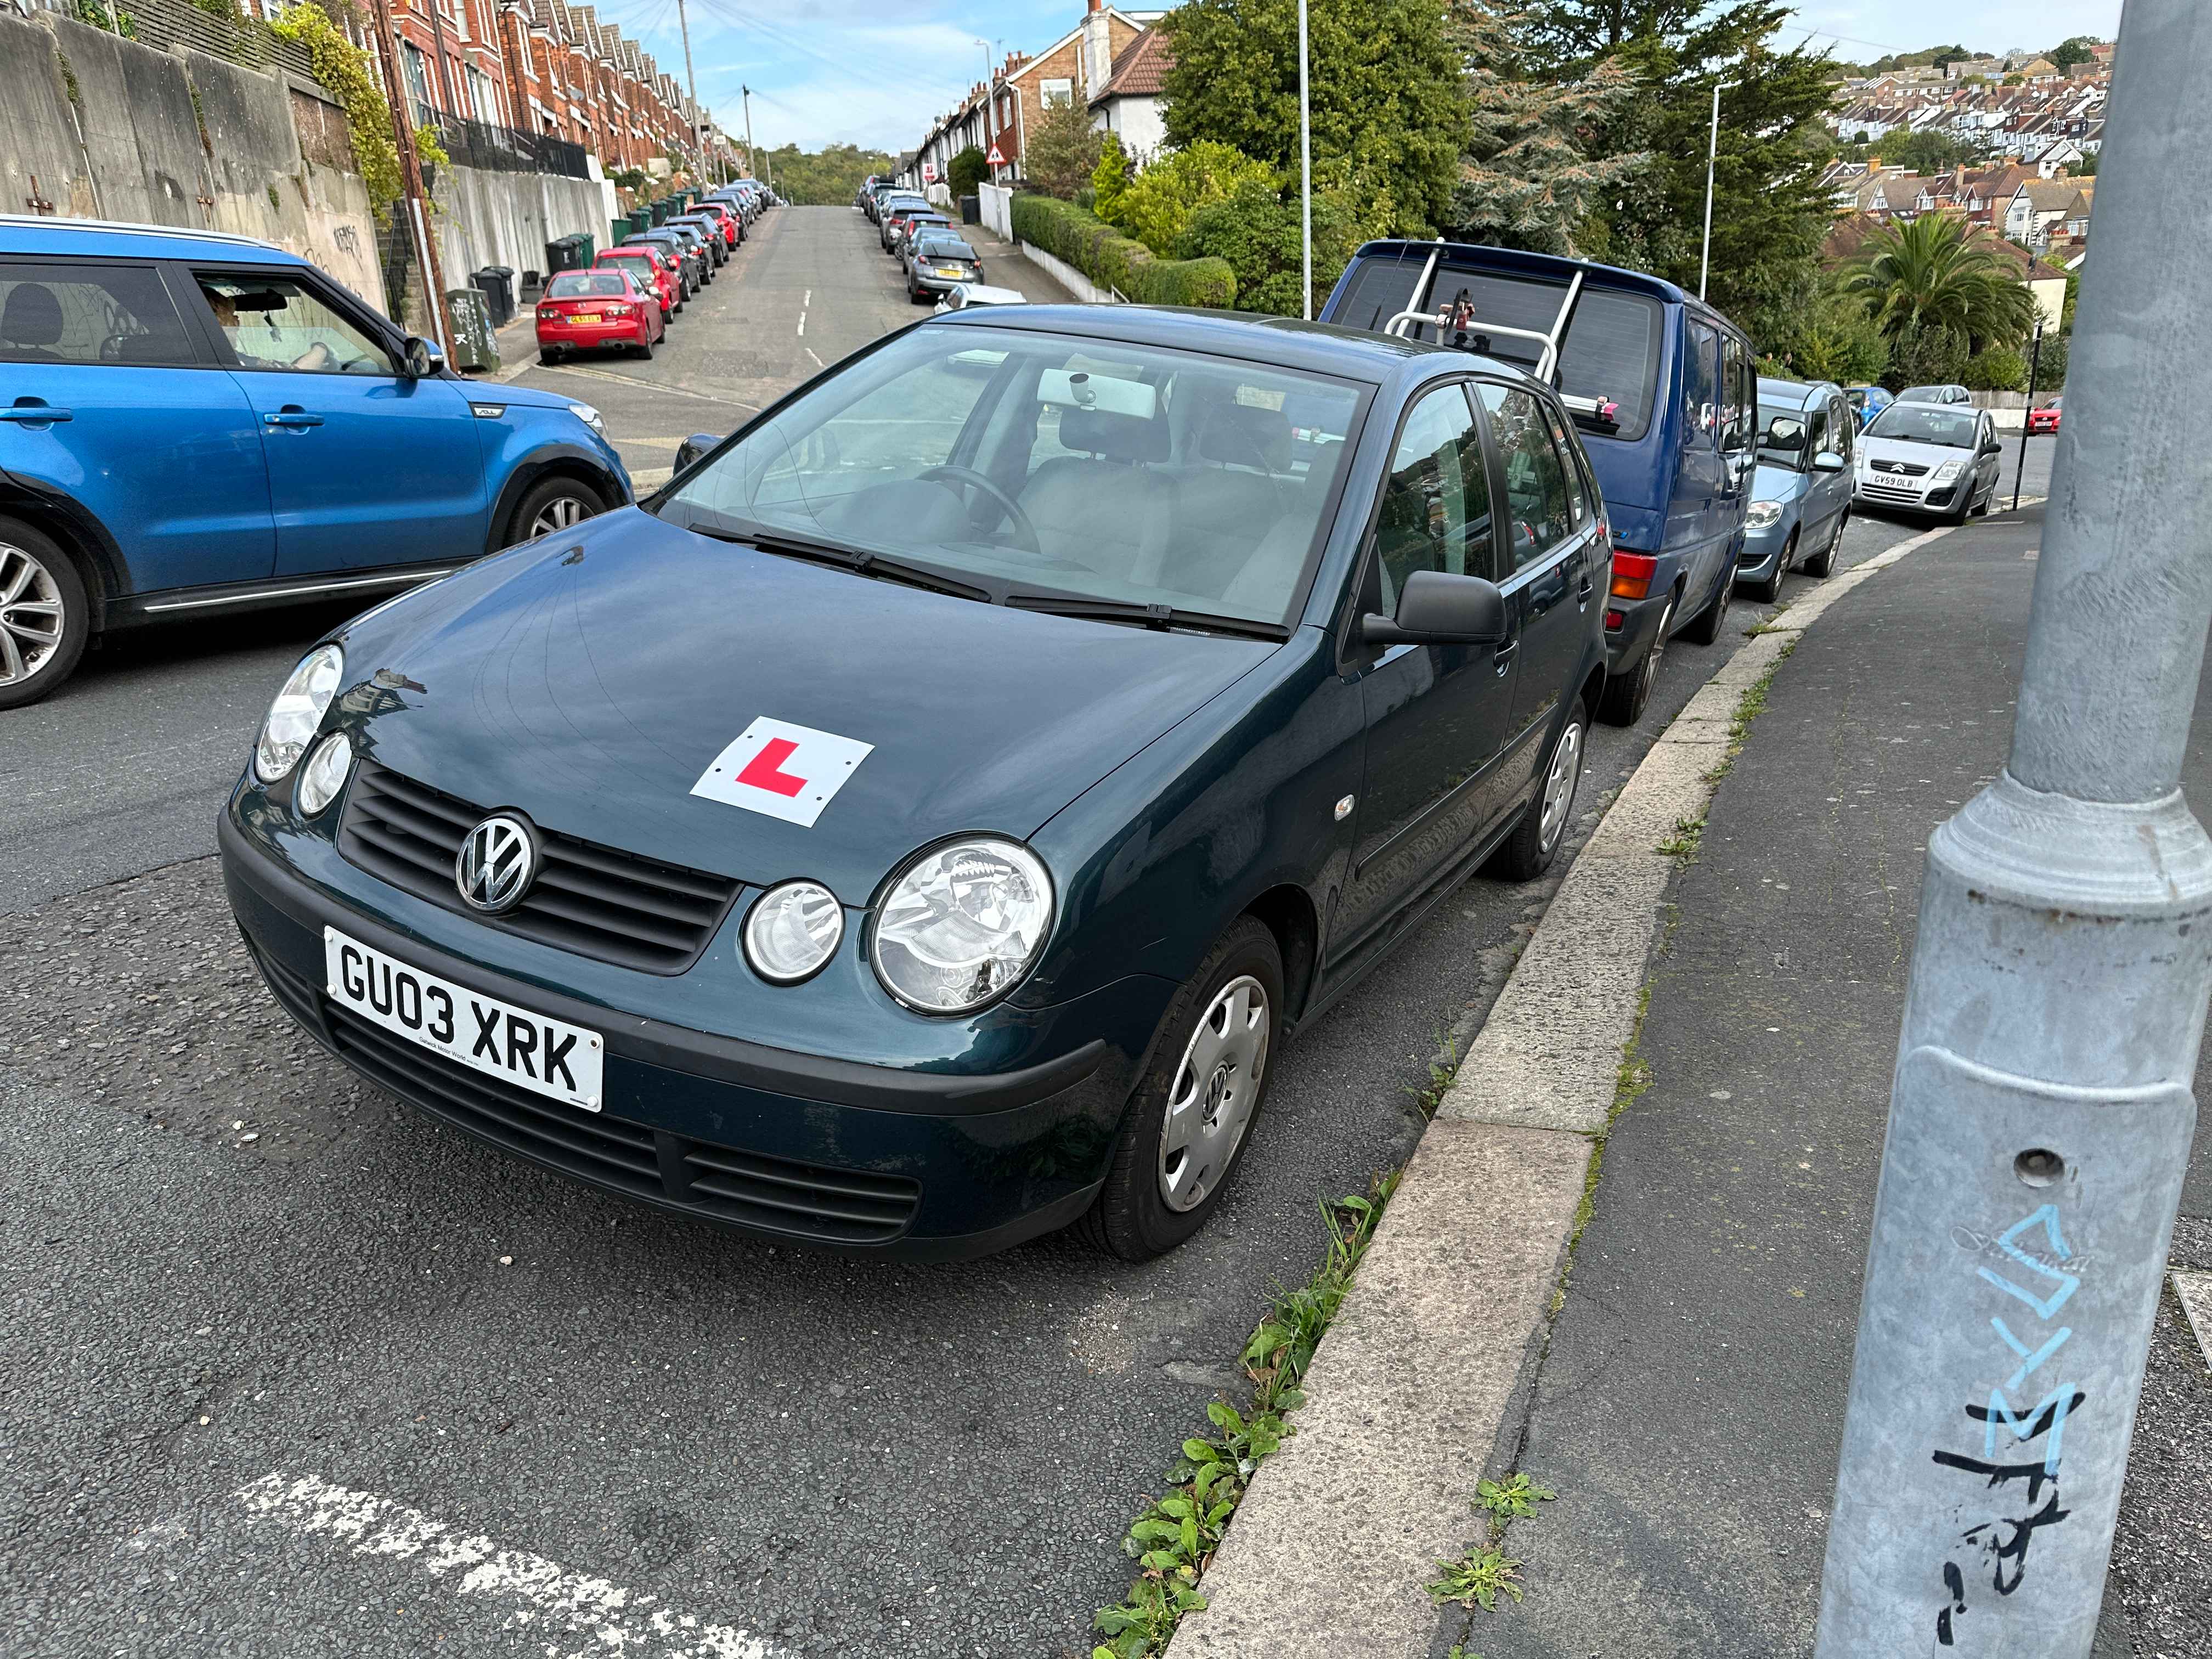 Photograph of GU03 XRK - a Green Volkswagen Polo parked in Hollingdean by a non-resident. The third of eight photographs supplied by the residents of Hollingdean.